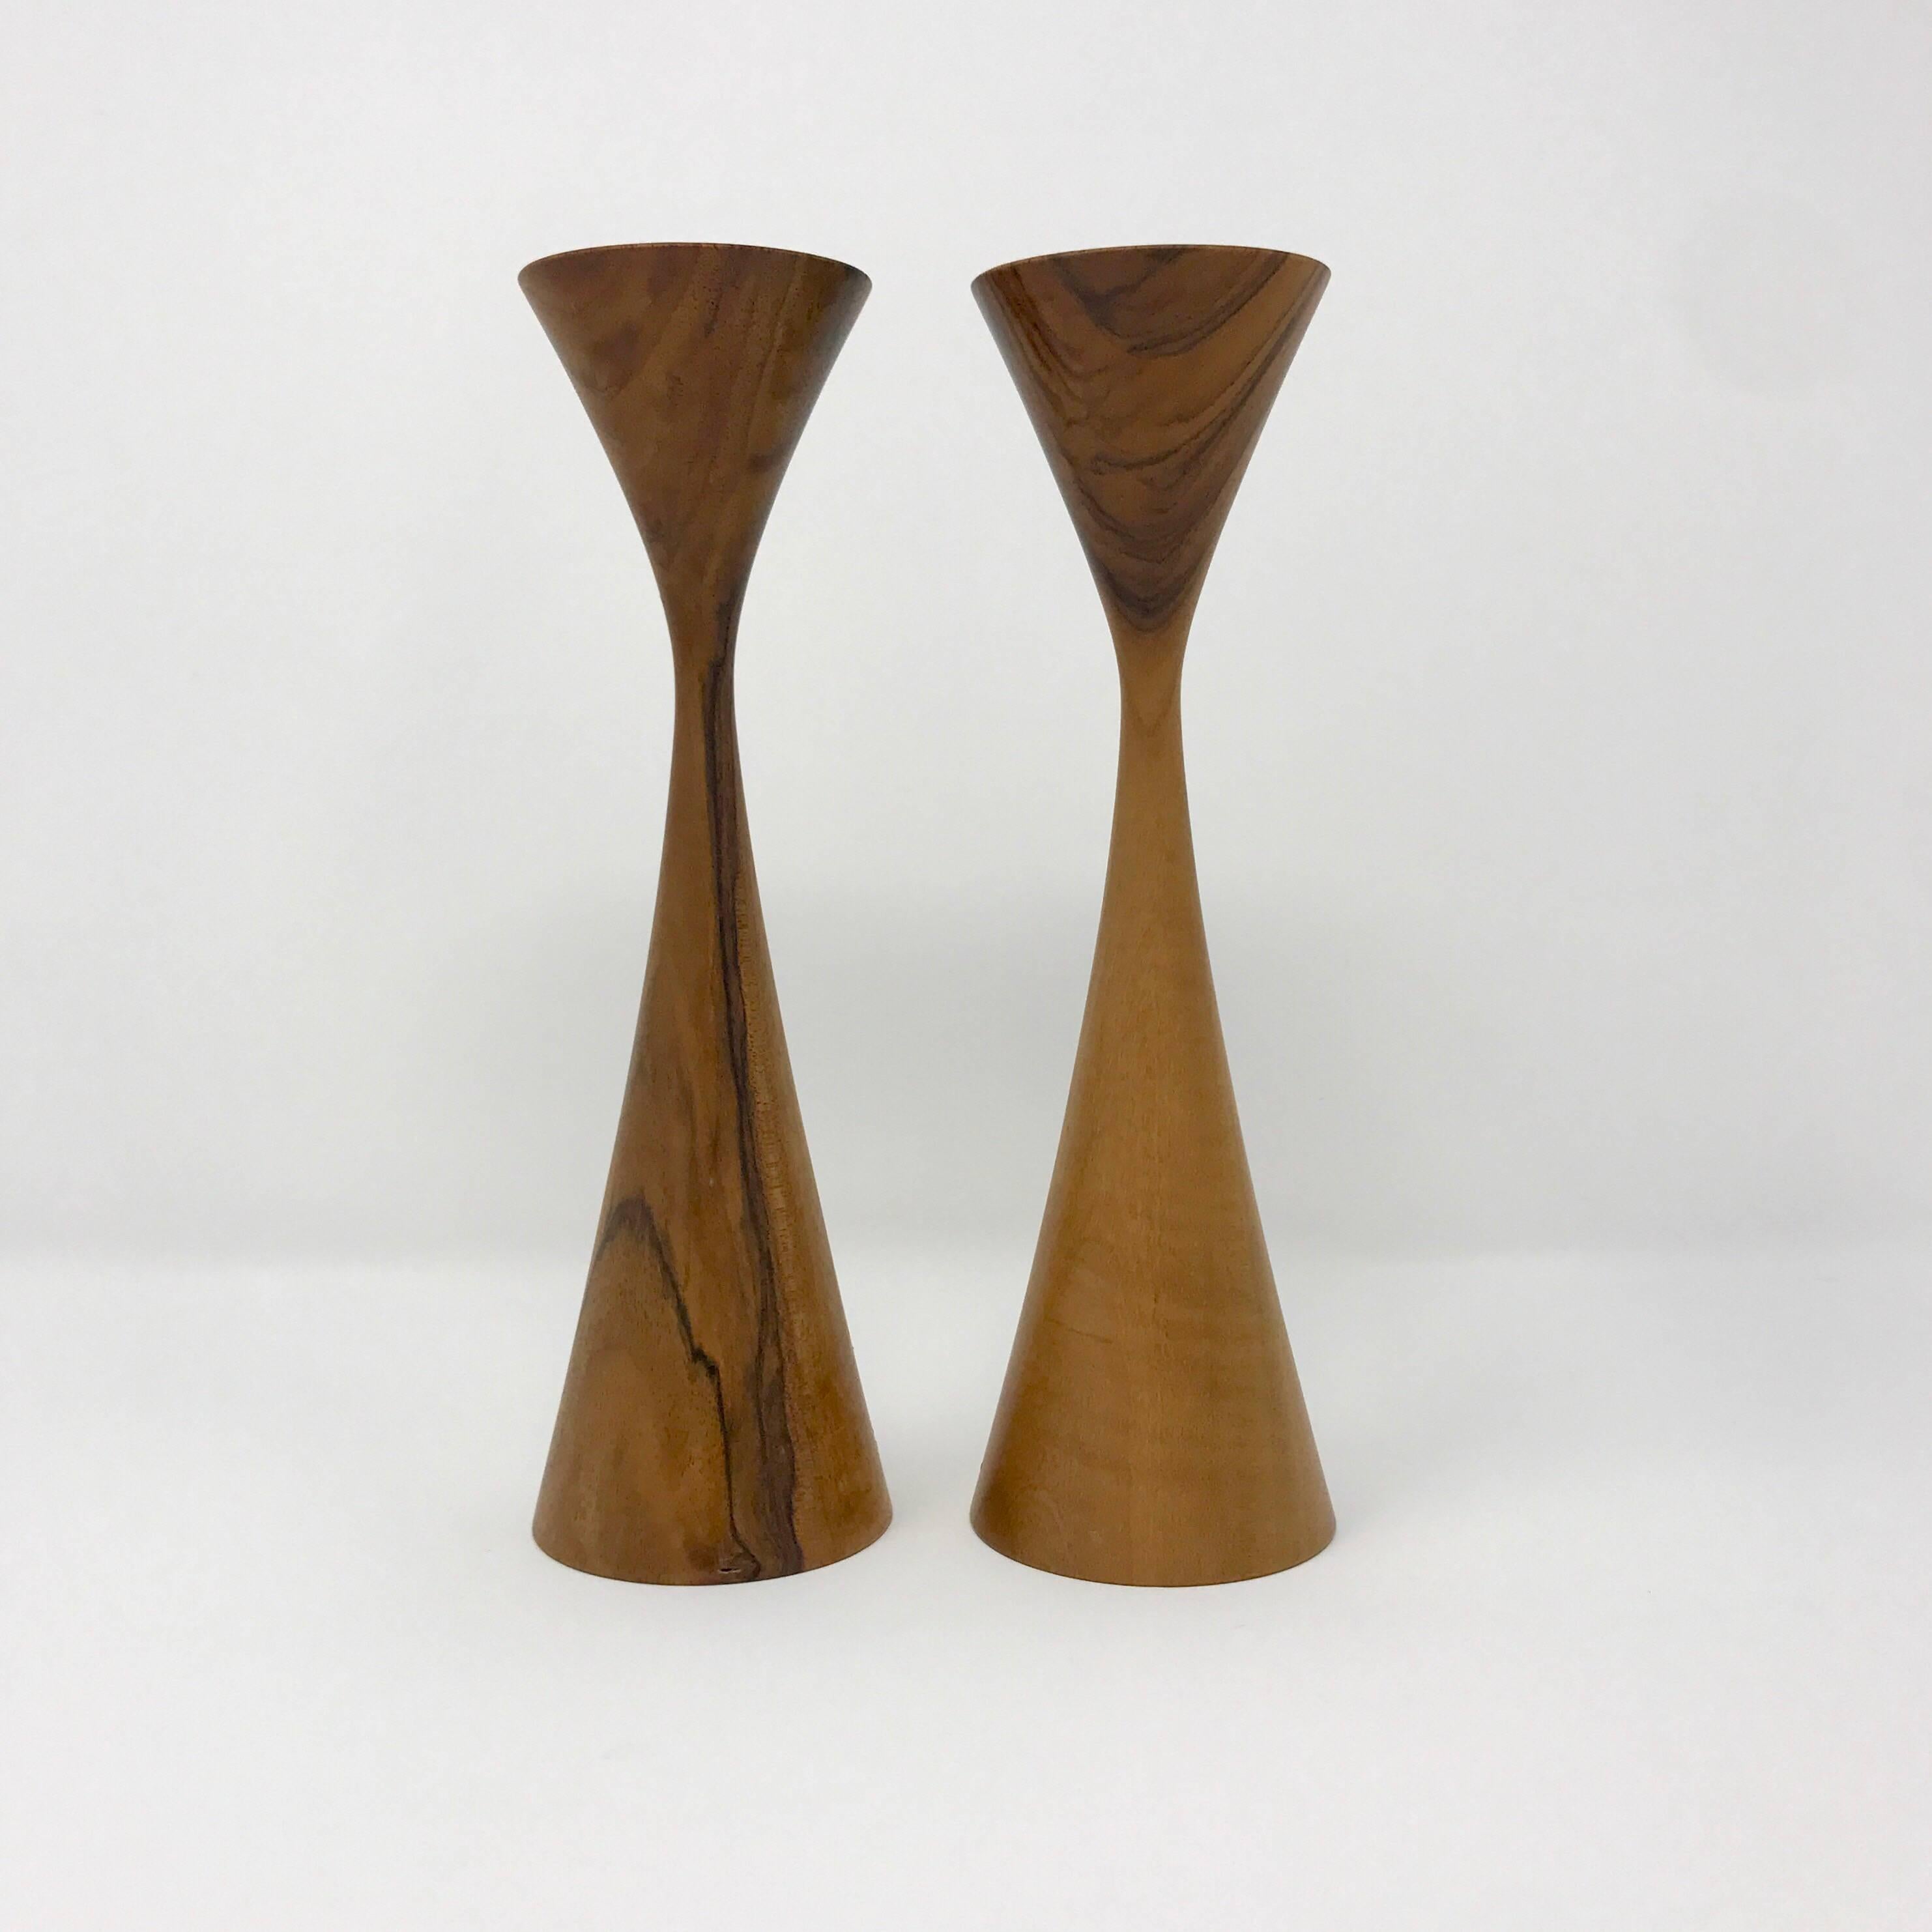 Mid-Century Modern Pair of Turned Wooden Candlesticks by Lanny Lyell